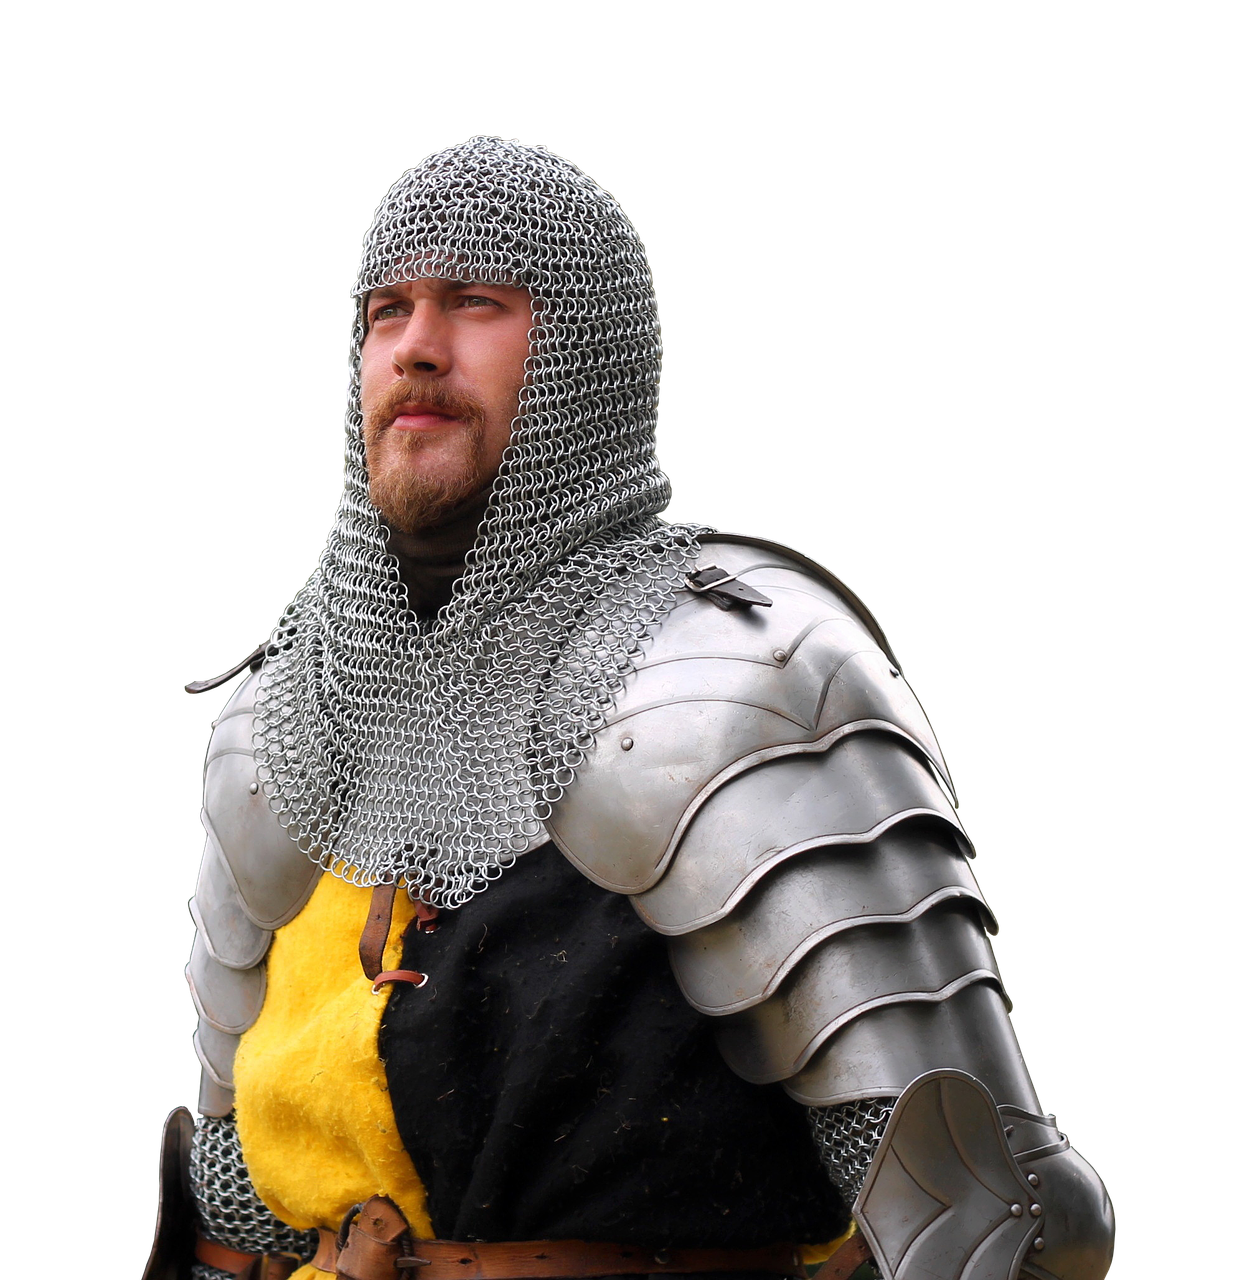 Download free photo of Knight,fencing,armor,leaf,middle ages - from ...